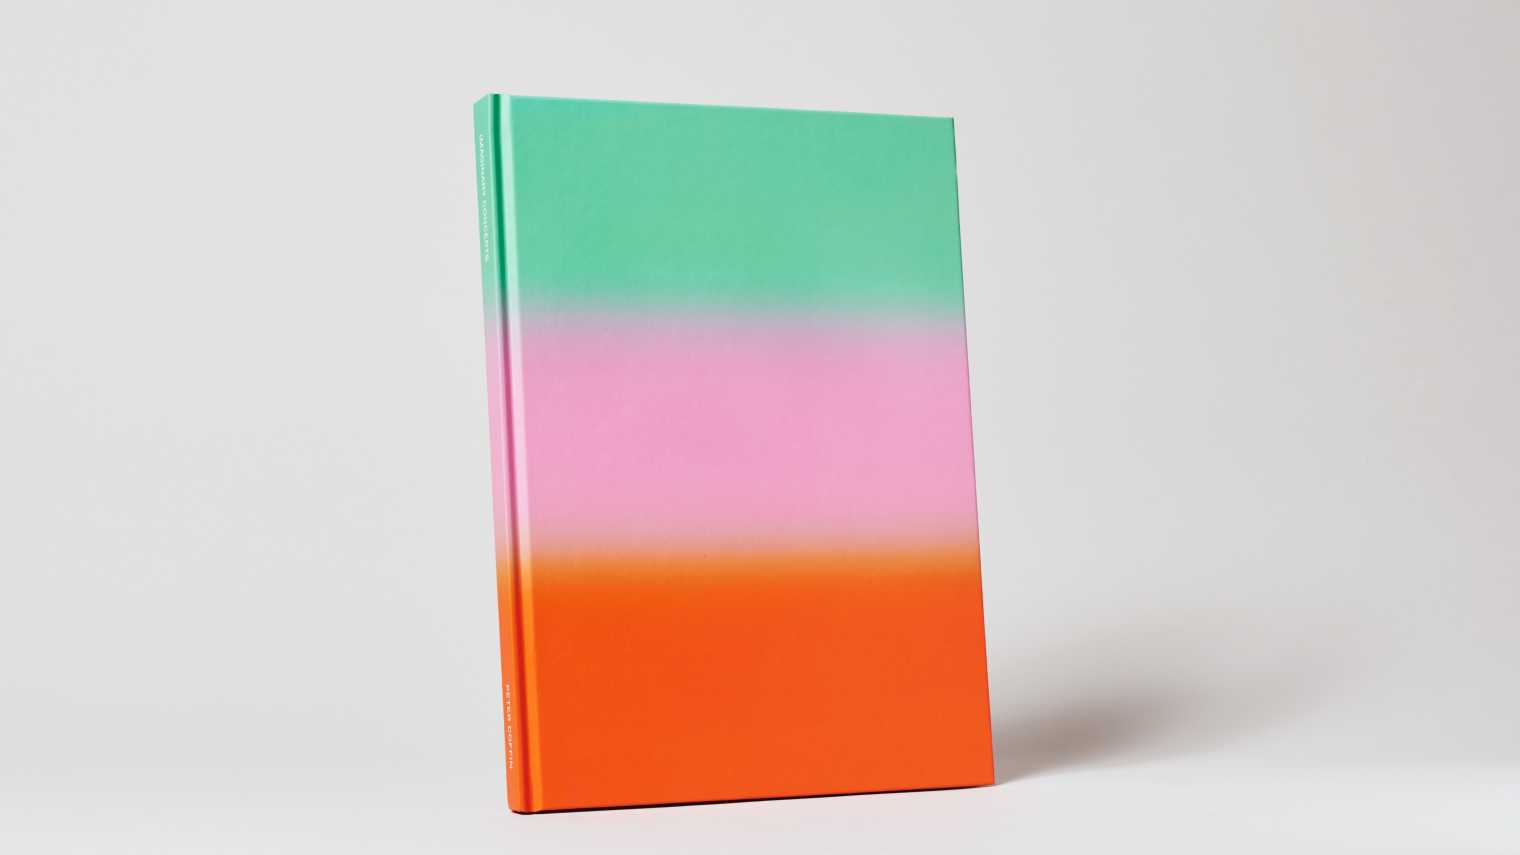 Upright book painted in descending swatches of green, pink and orange.